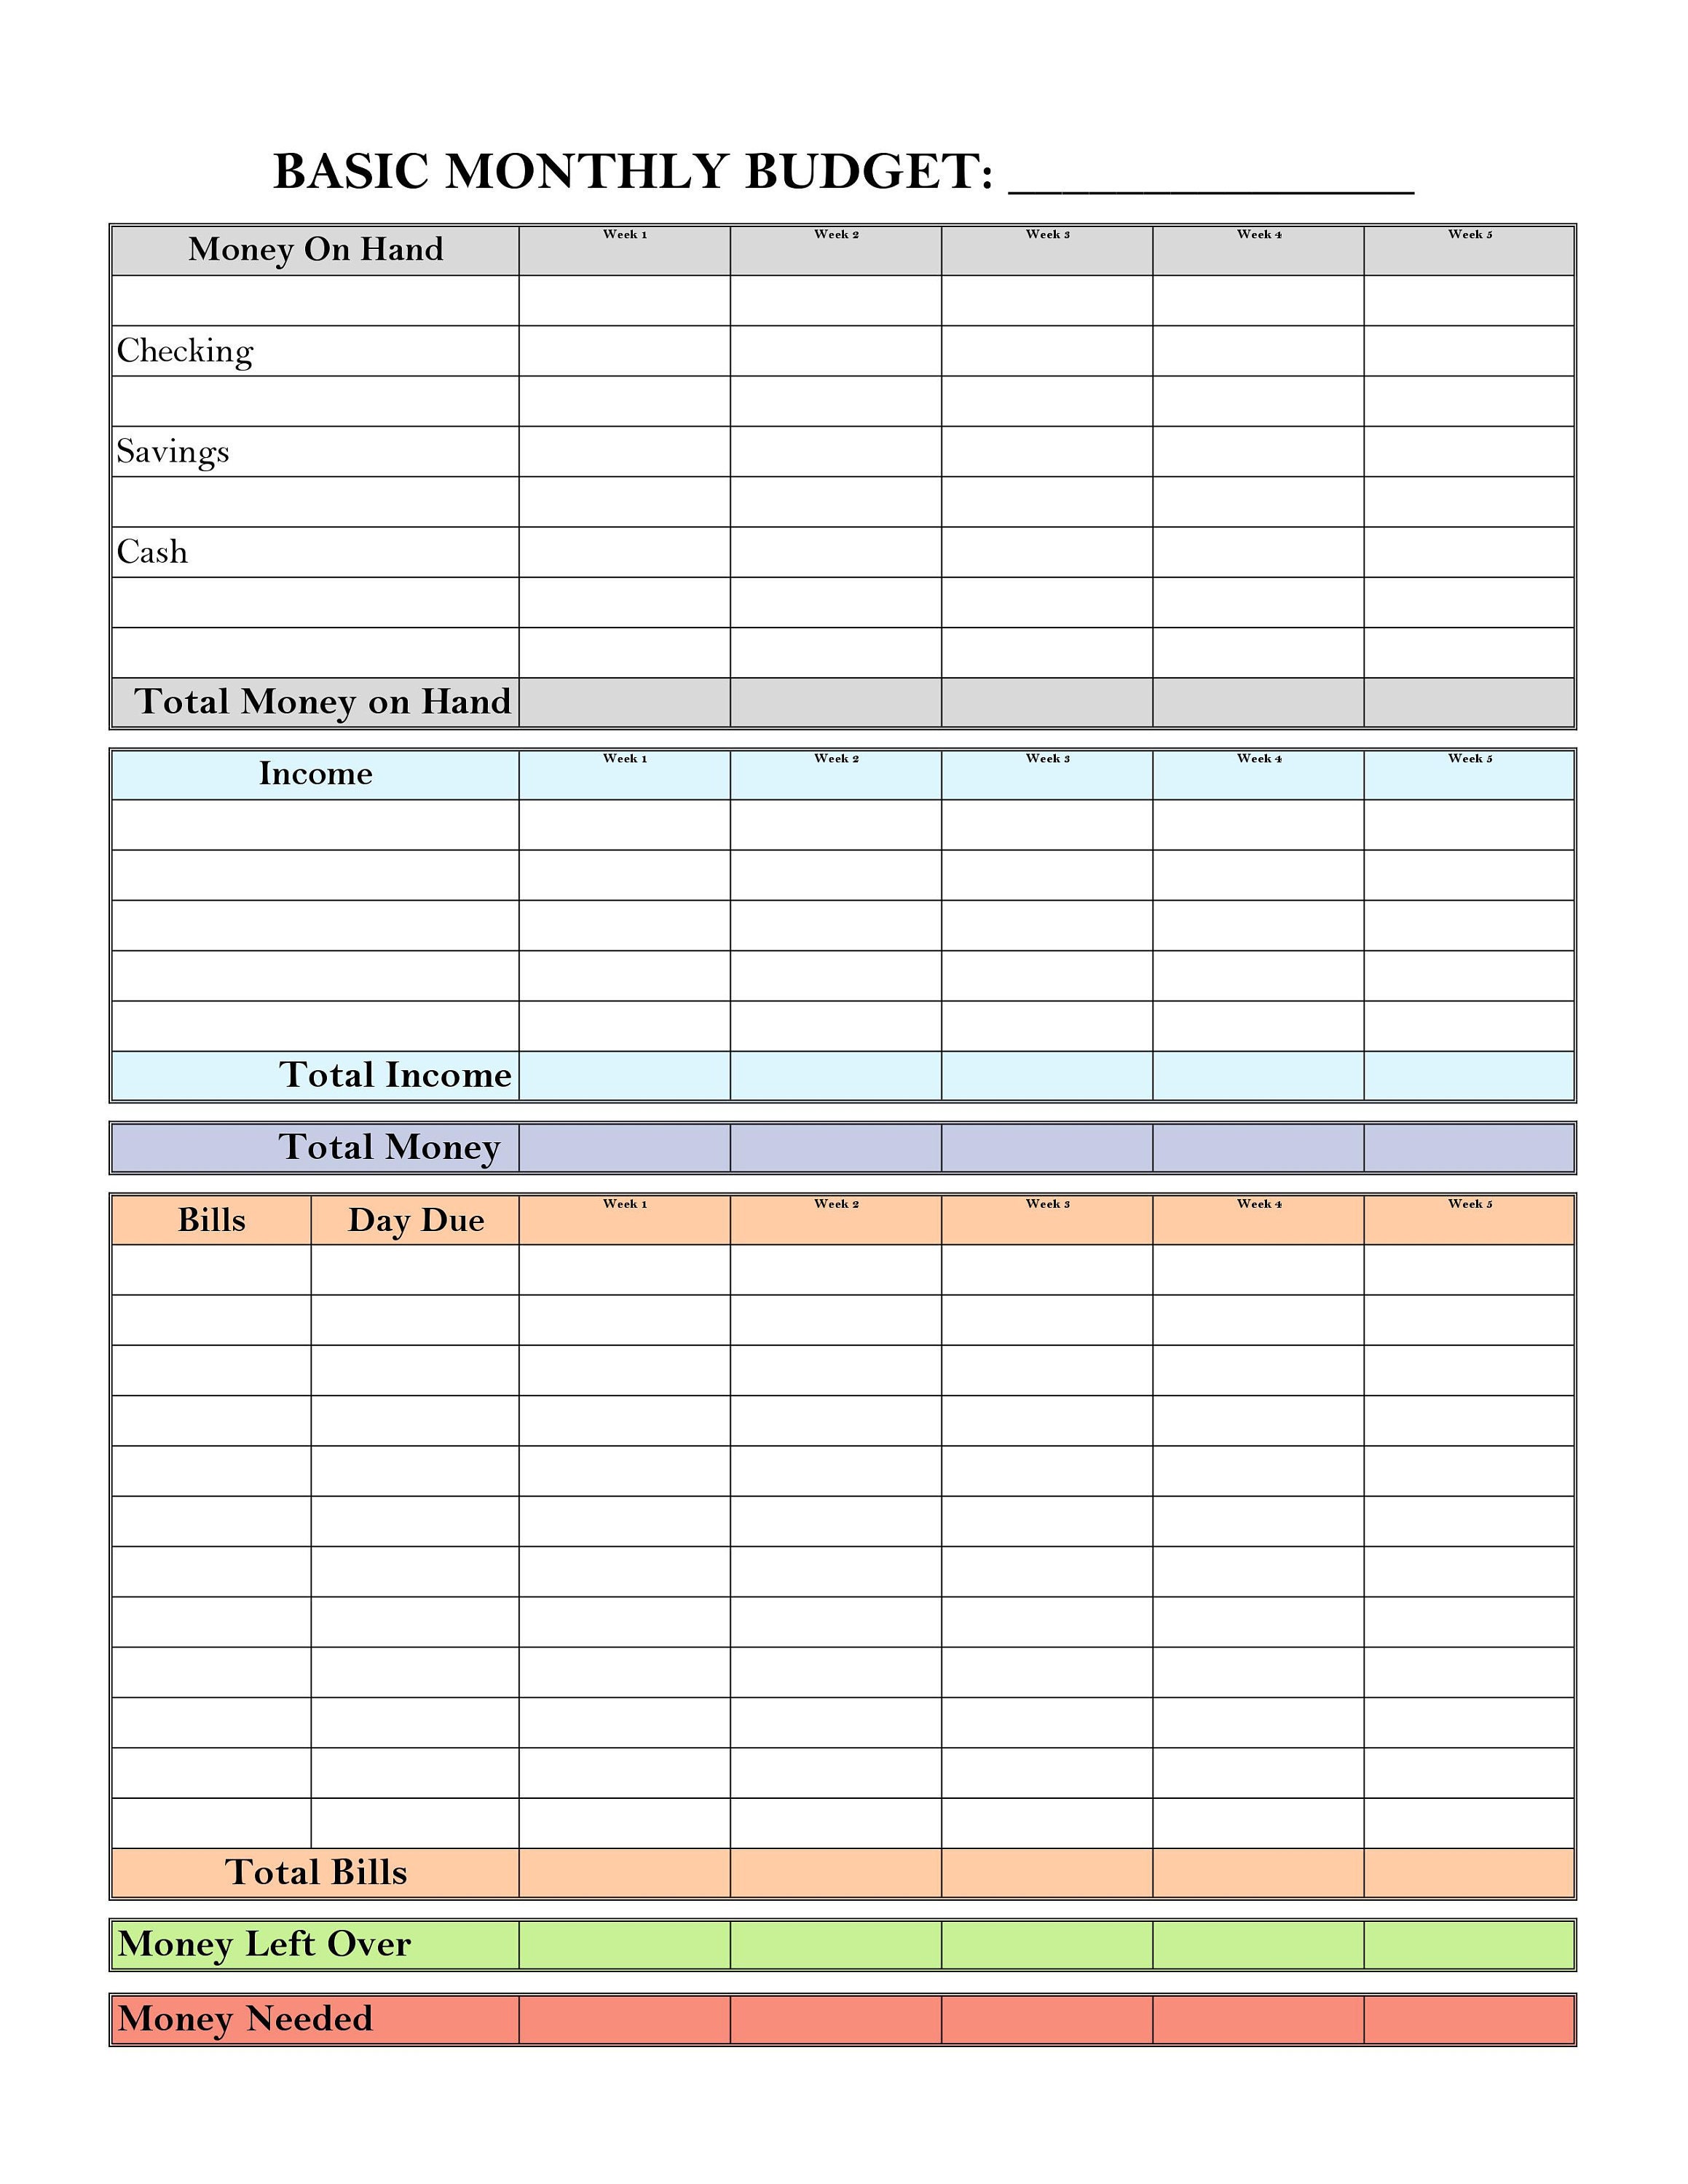 basic-monthly-budget-form-for-weekly-pay-pdf-google-sheet-etsy